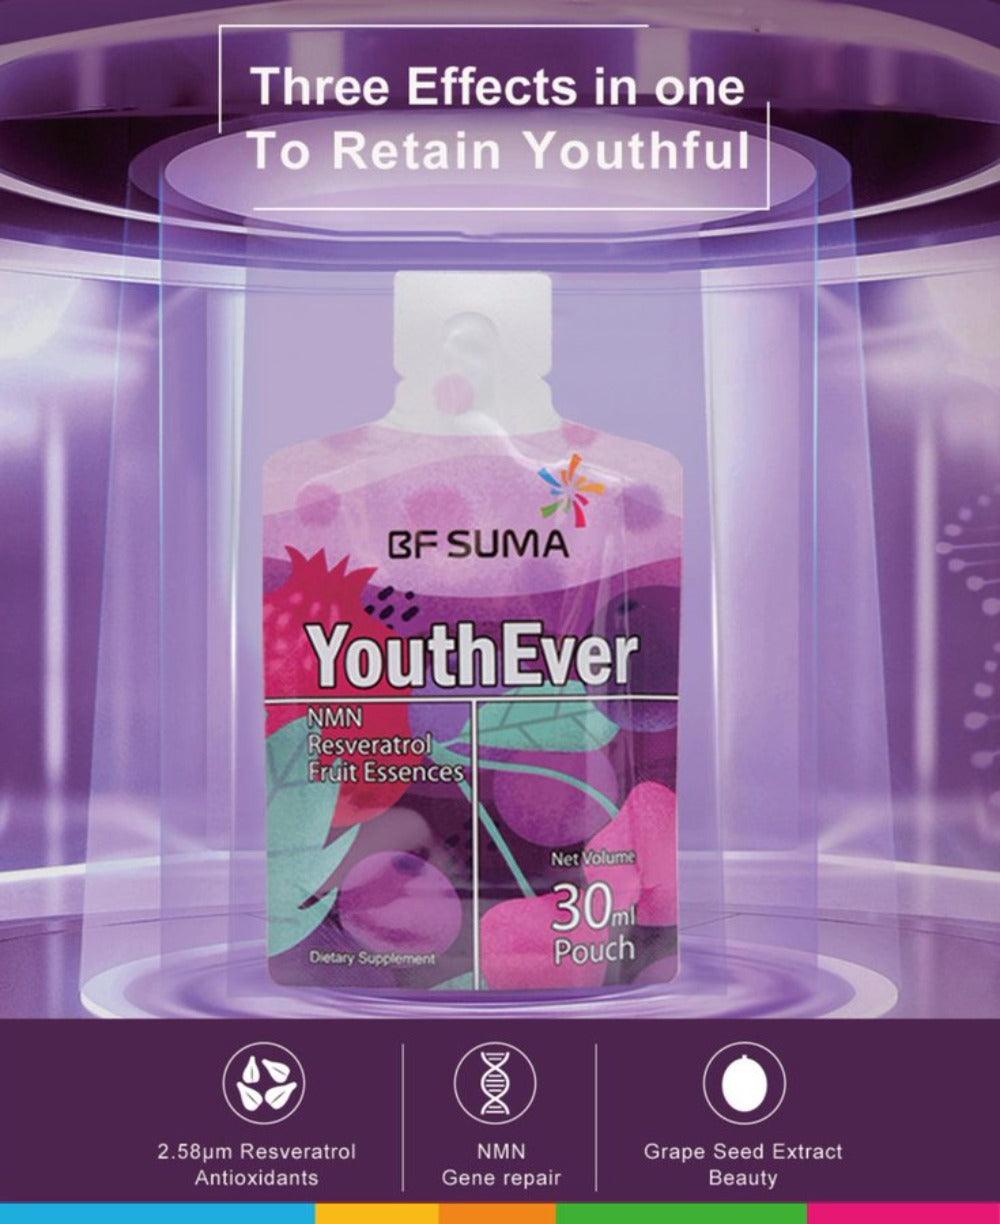 bf suma youth ever inside pouch